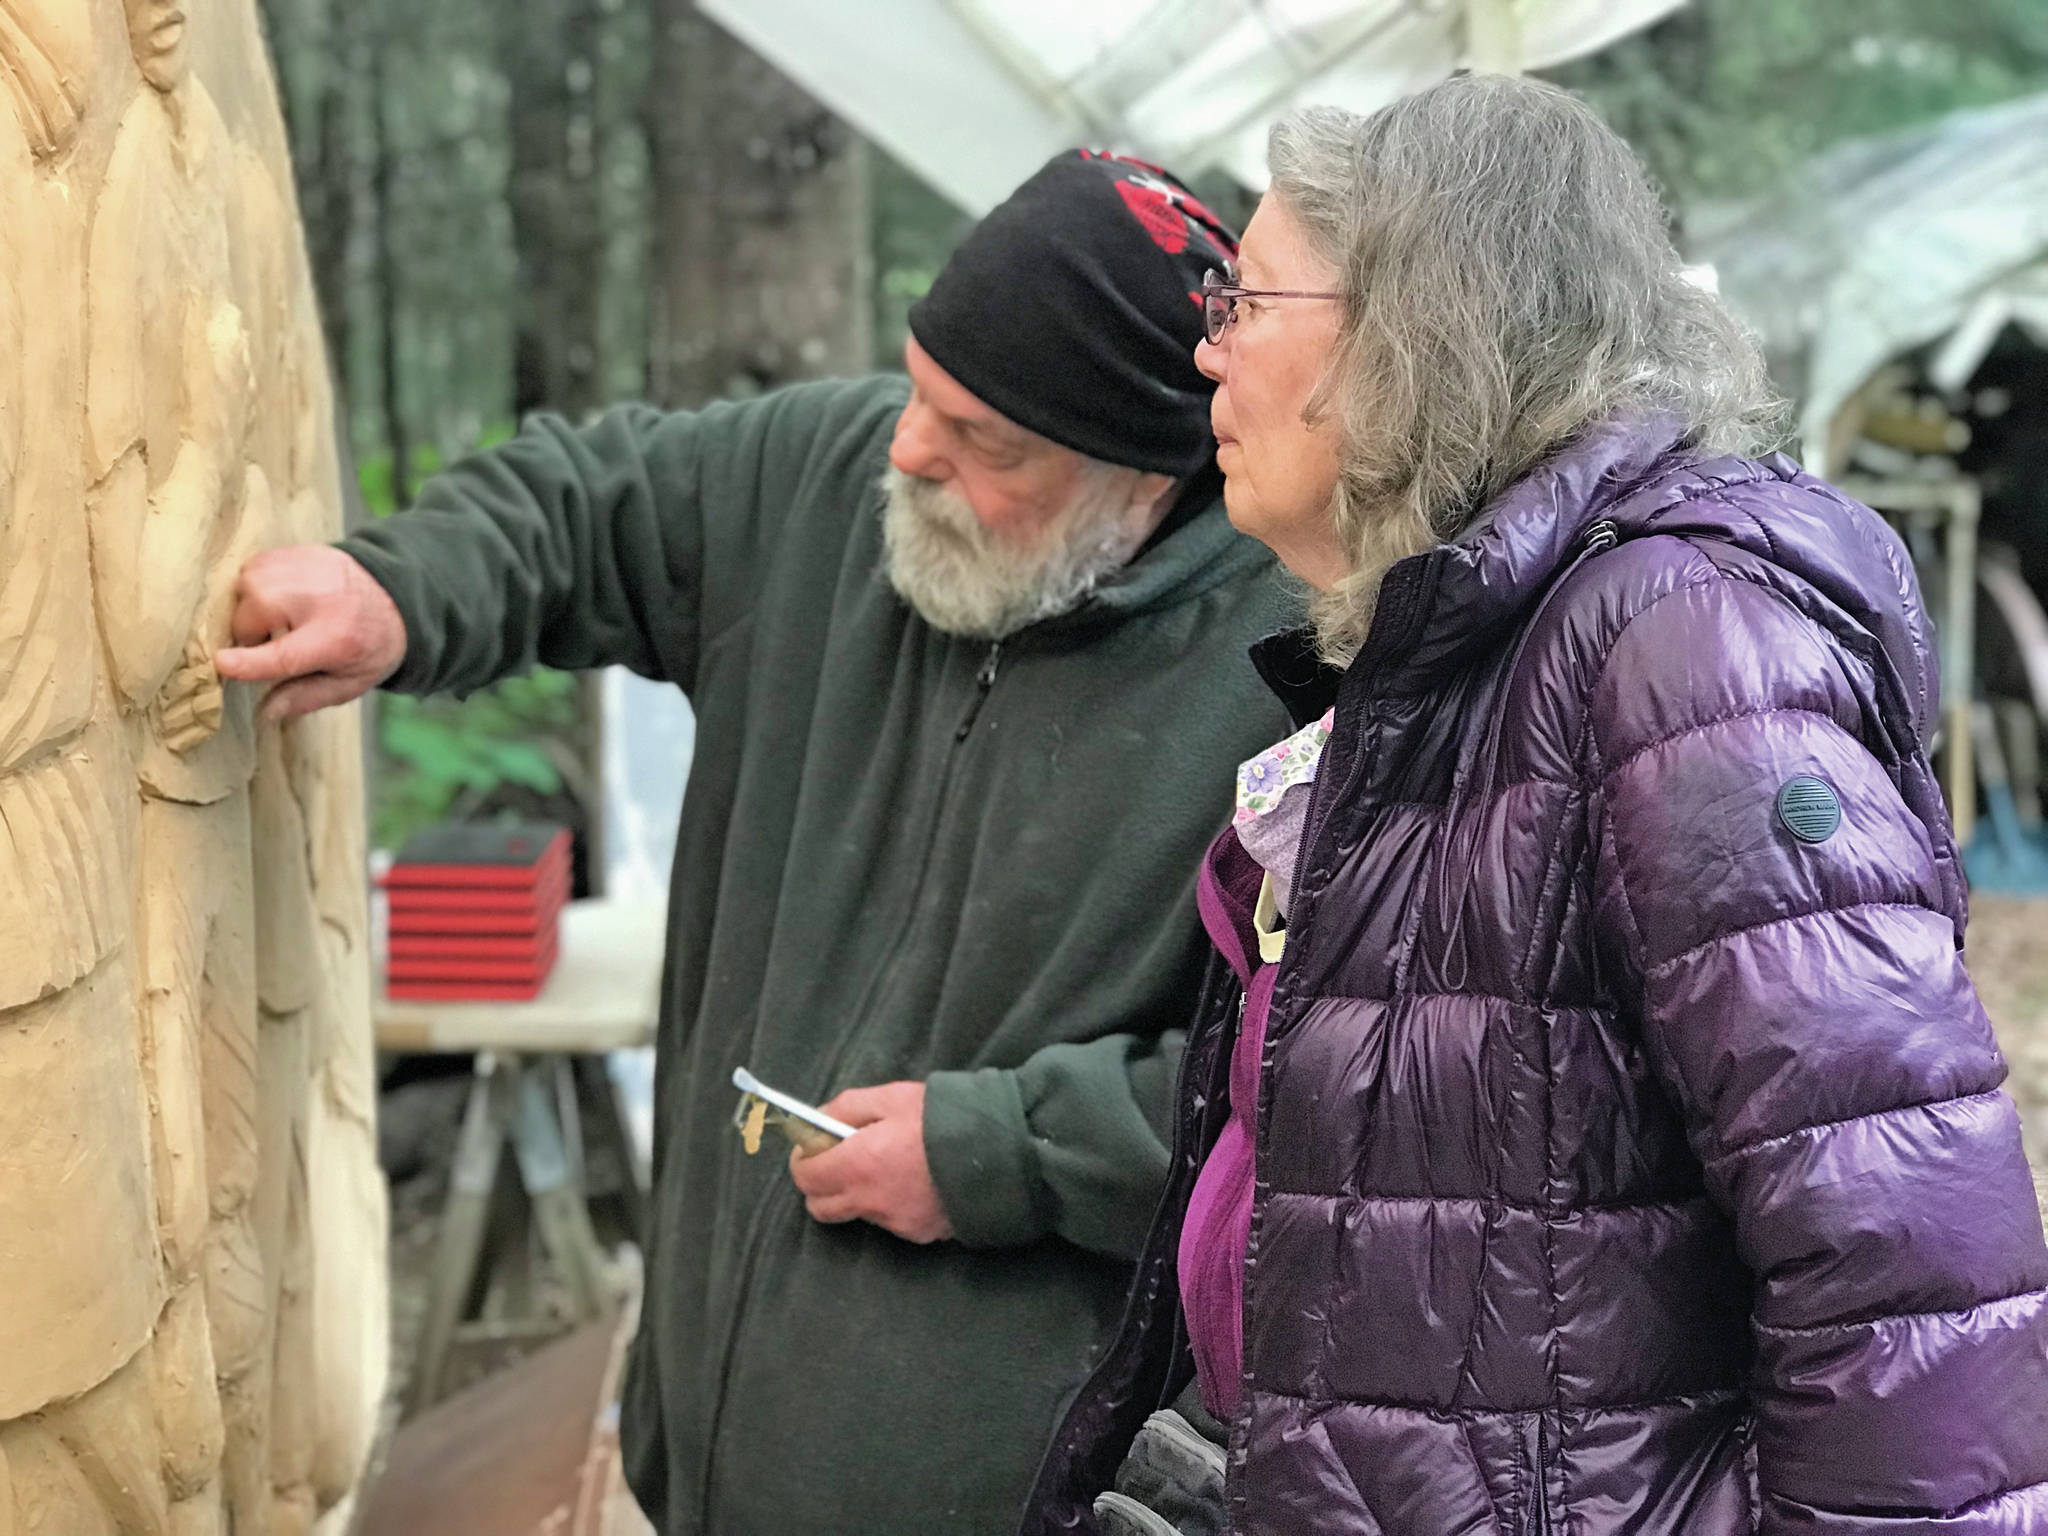 Sara Berg, right, talks with artist Brad Hughes, left, at Hughes’ Homer, Alaska, studio in June 2021 about the Loved & Lost Memorial Bench project Berg and other family and friends of Anesha Murnane commissioned to honor Murnane and other missing woman and children. (Photo by Christina Whiting)